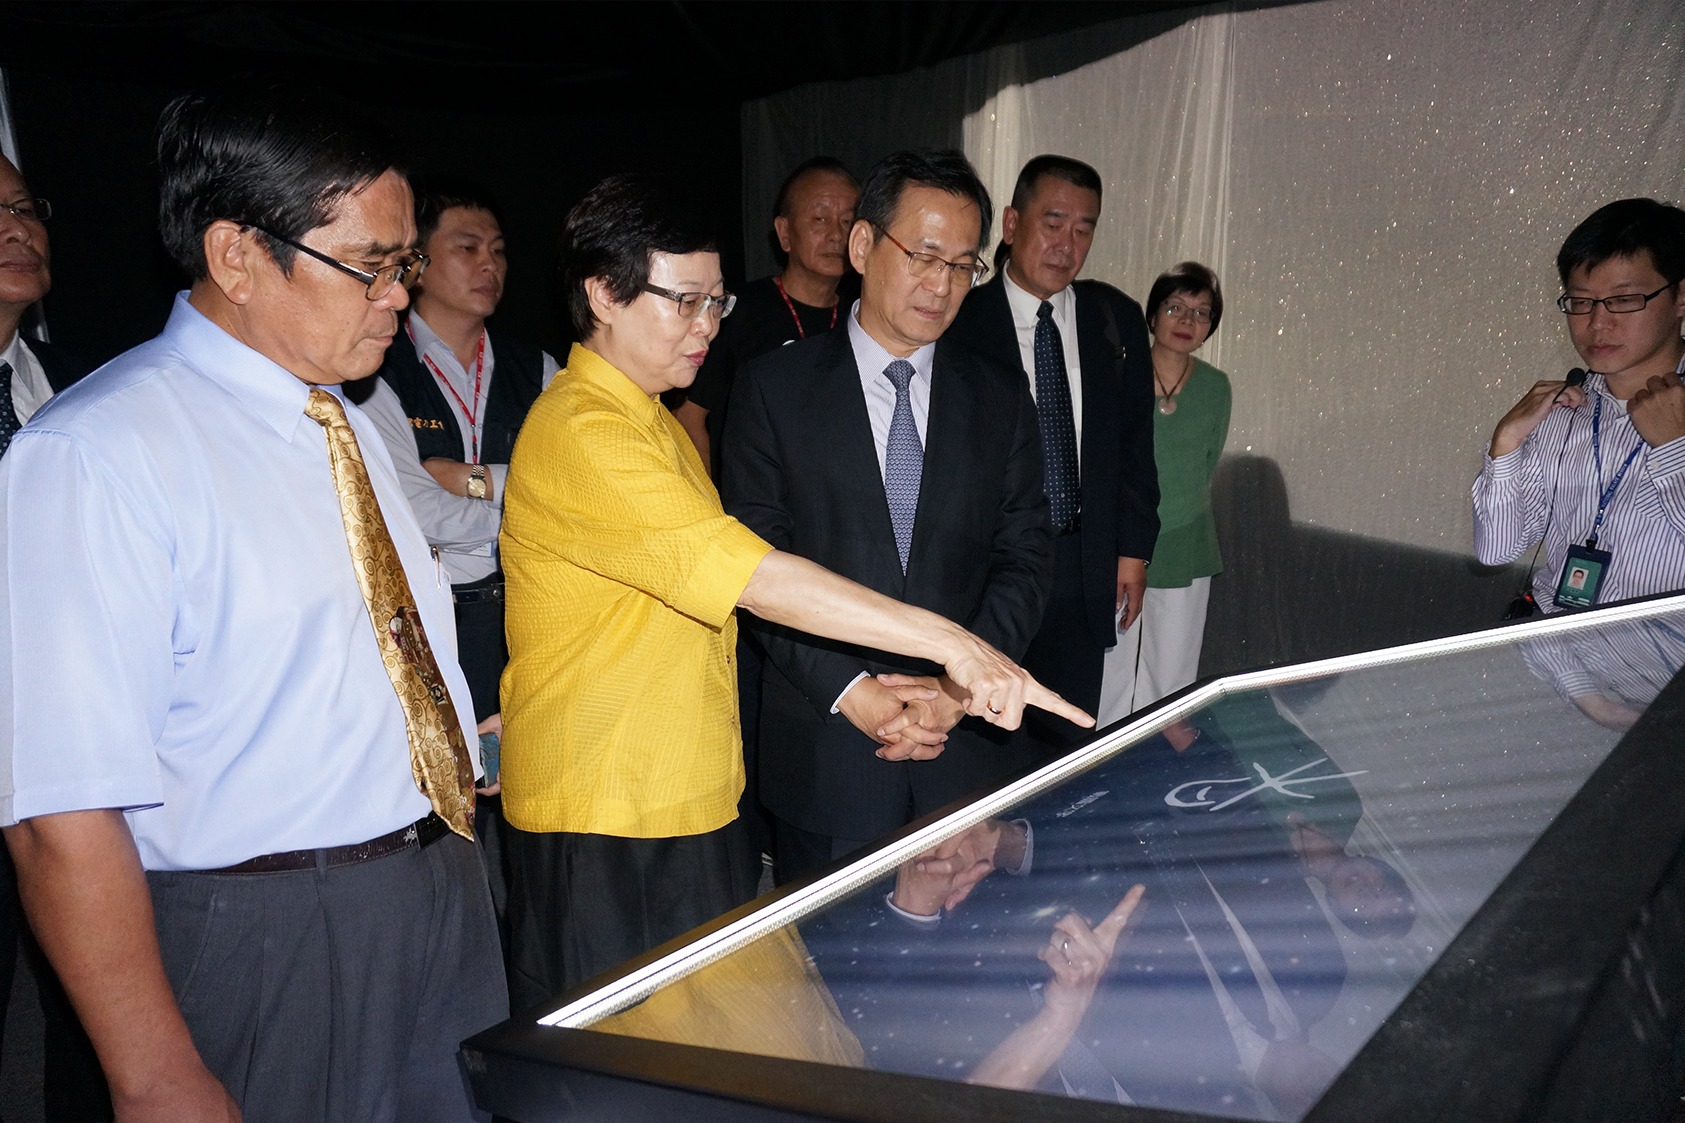 NPM Director Fung Mingchu demonstrates how to use the Mao-Gong Ding Interactive Tabletop of Chinese Characters